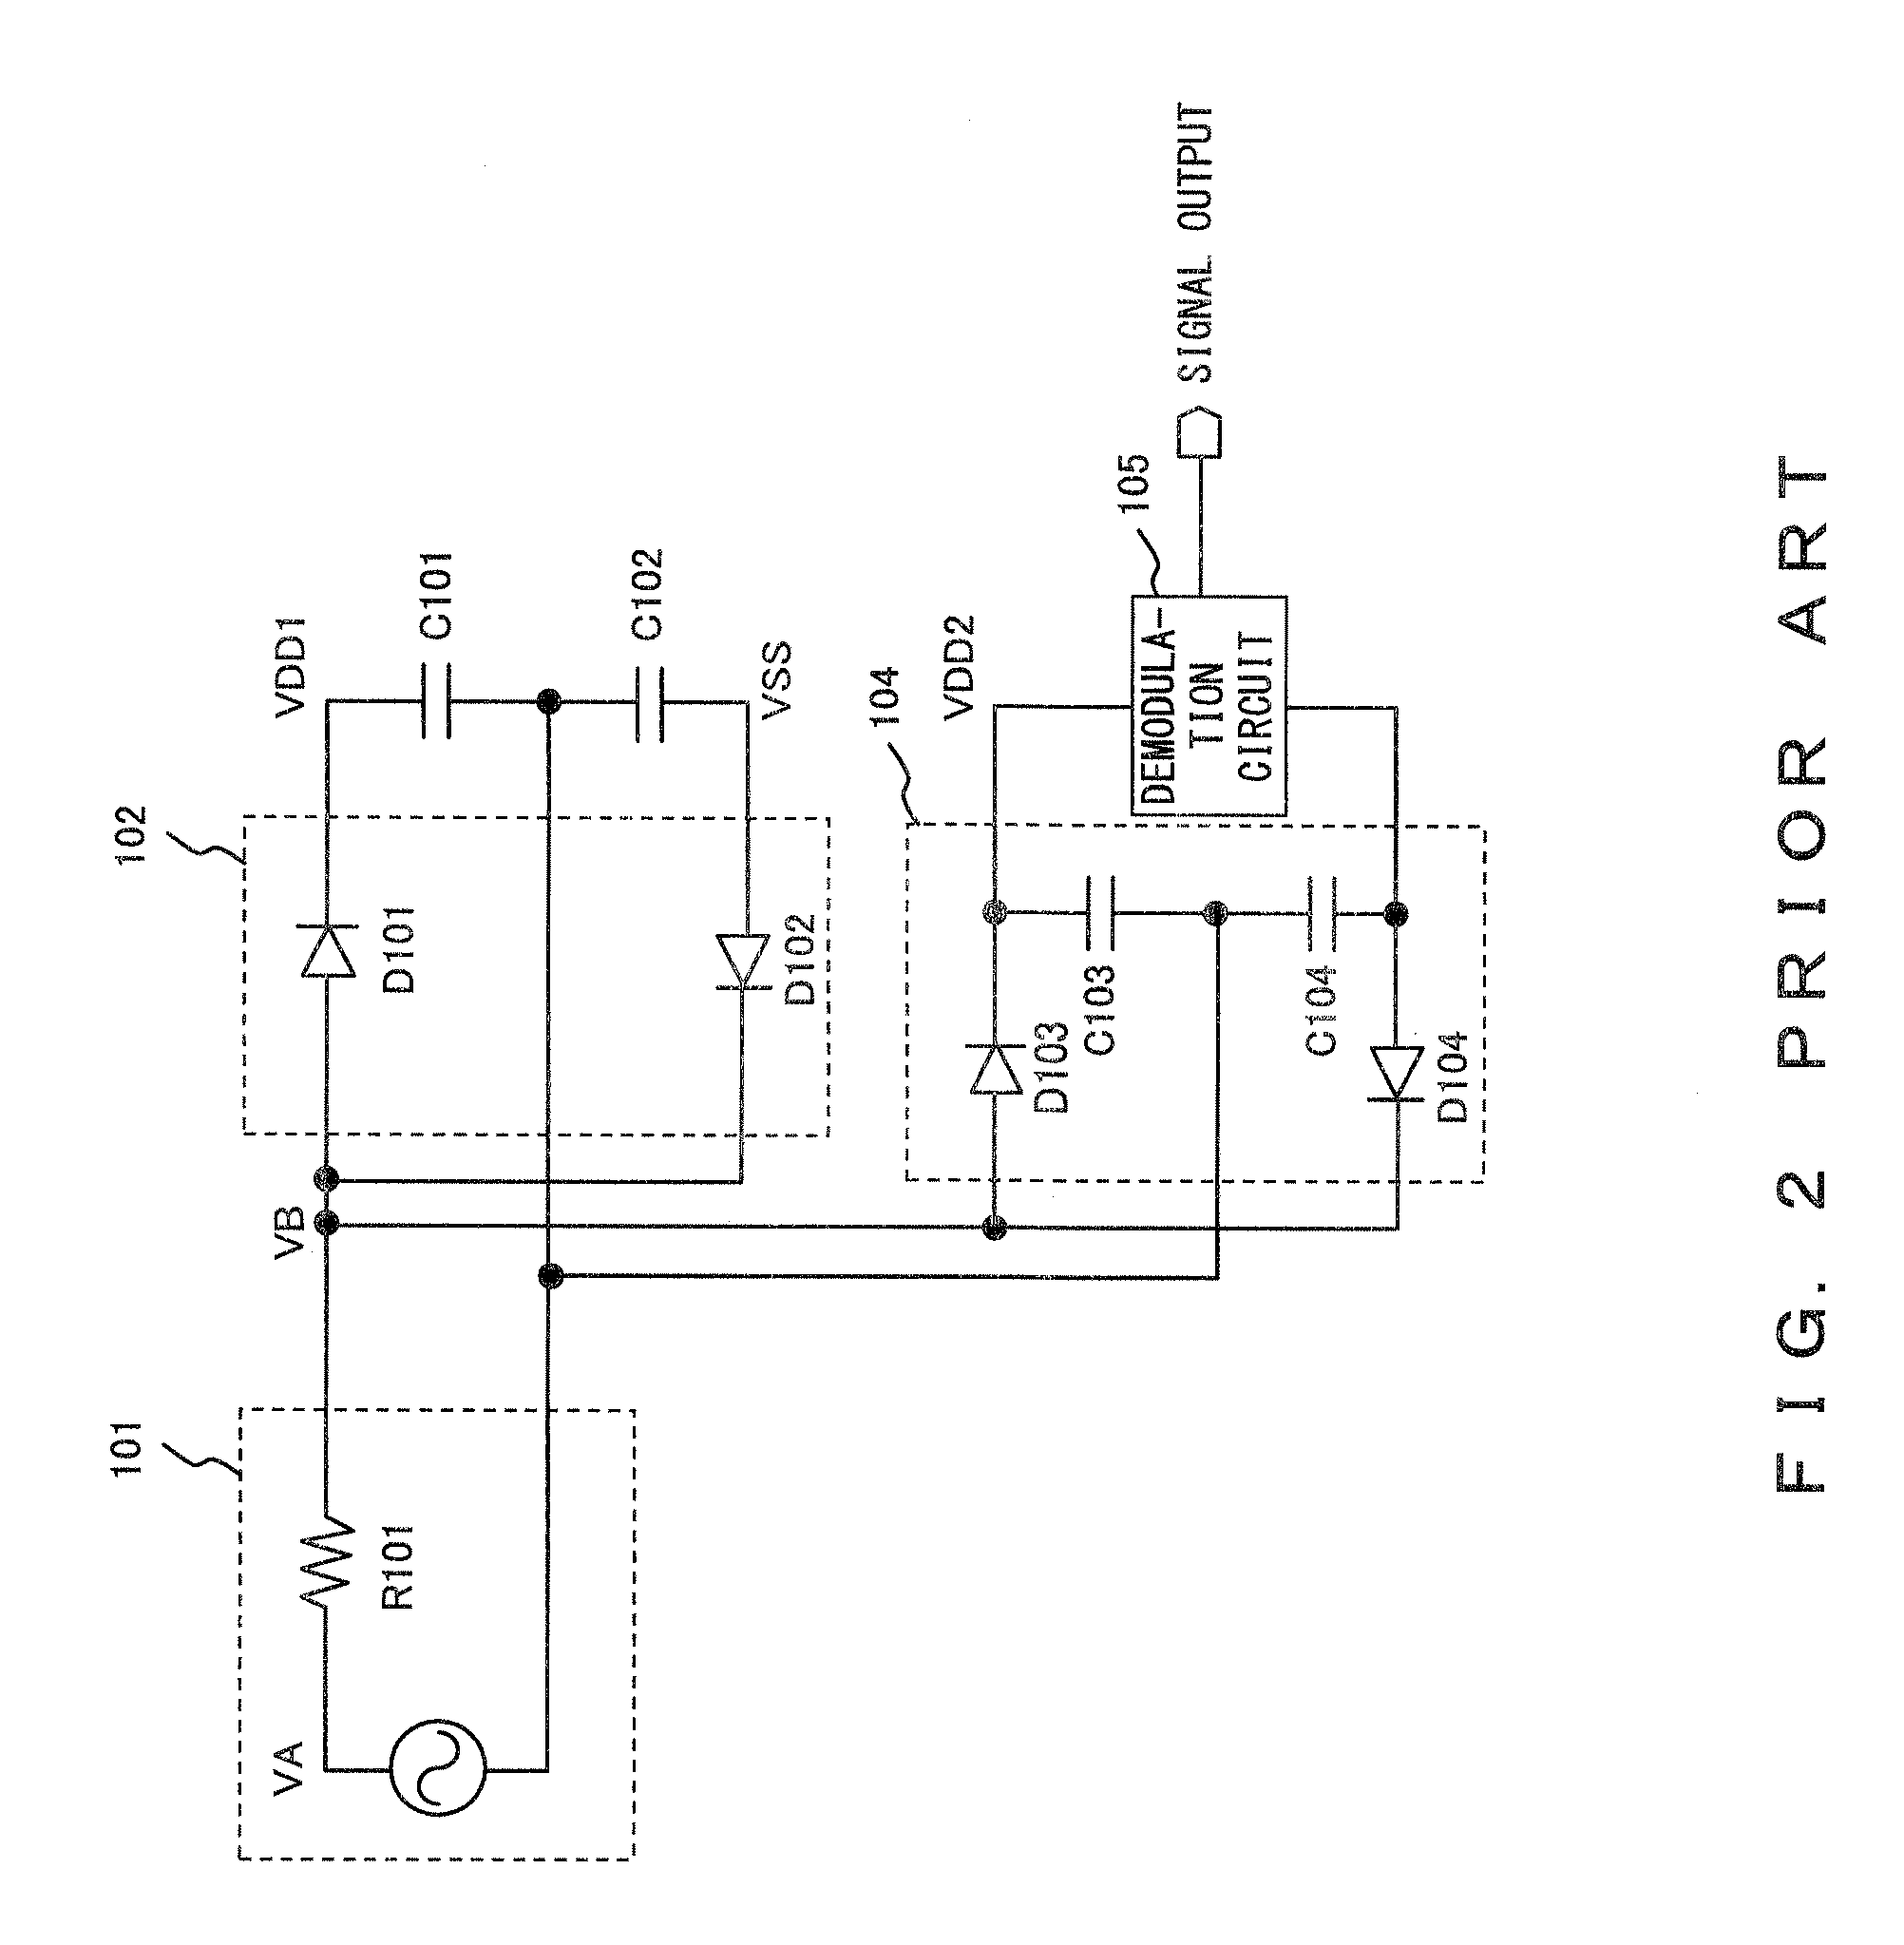 Signal extraction circuit